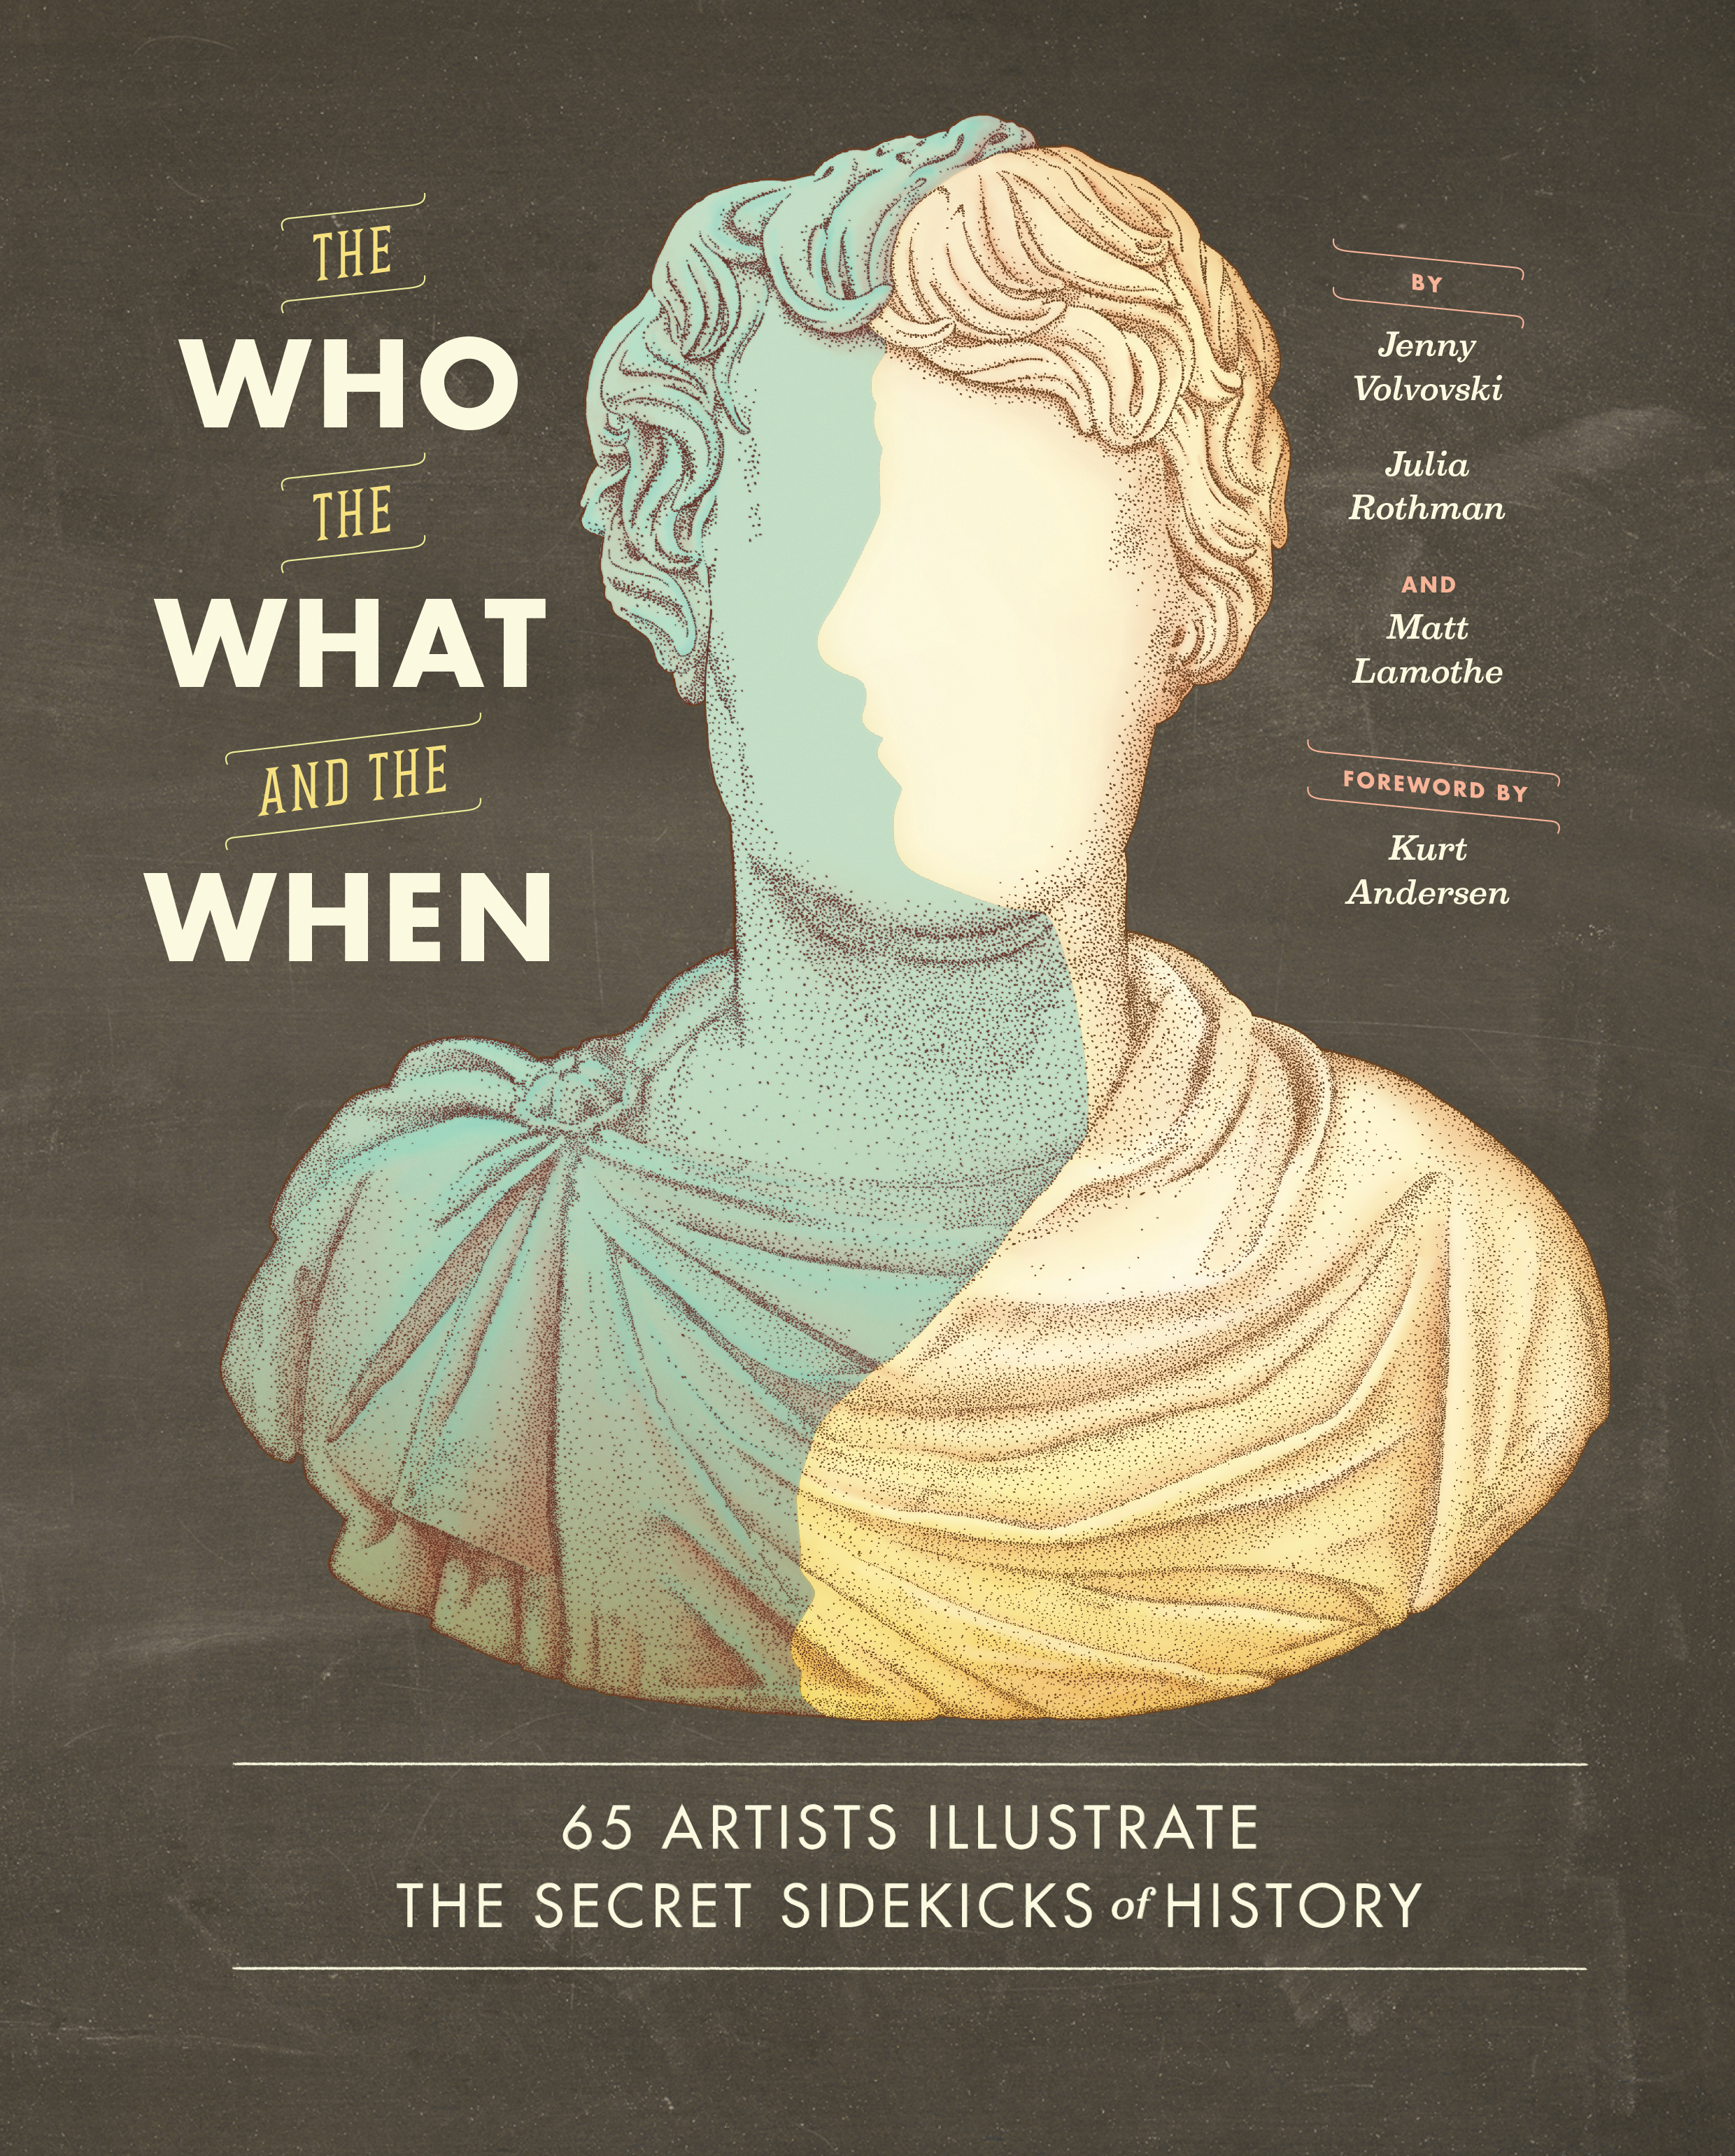 Book Launch: The Who, the What, and the When by Jenny Volvovski, Julia Rothman, and Matt Lamothe